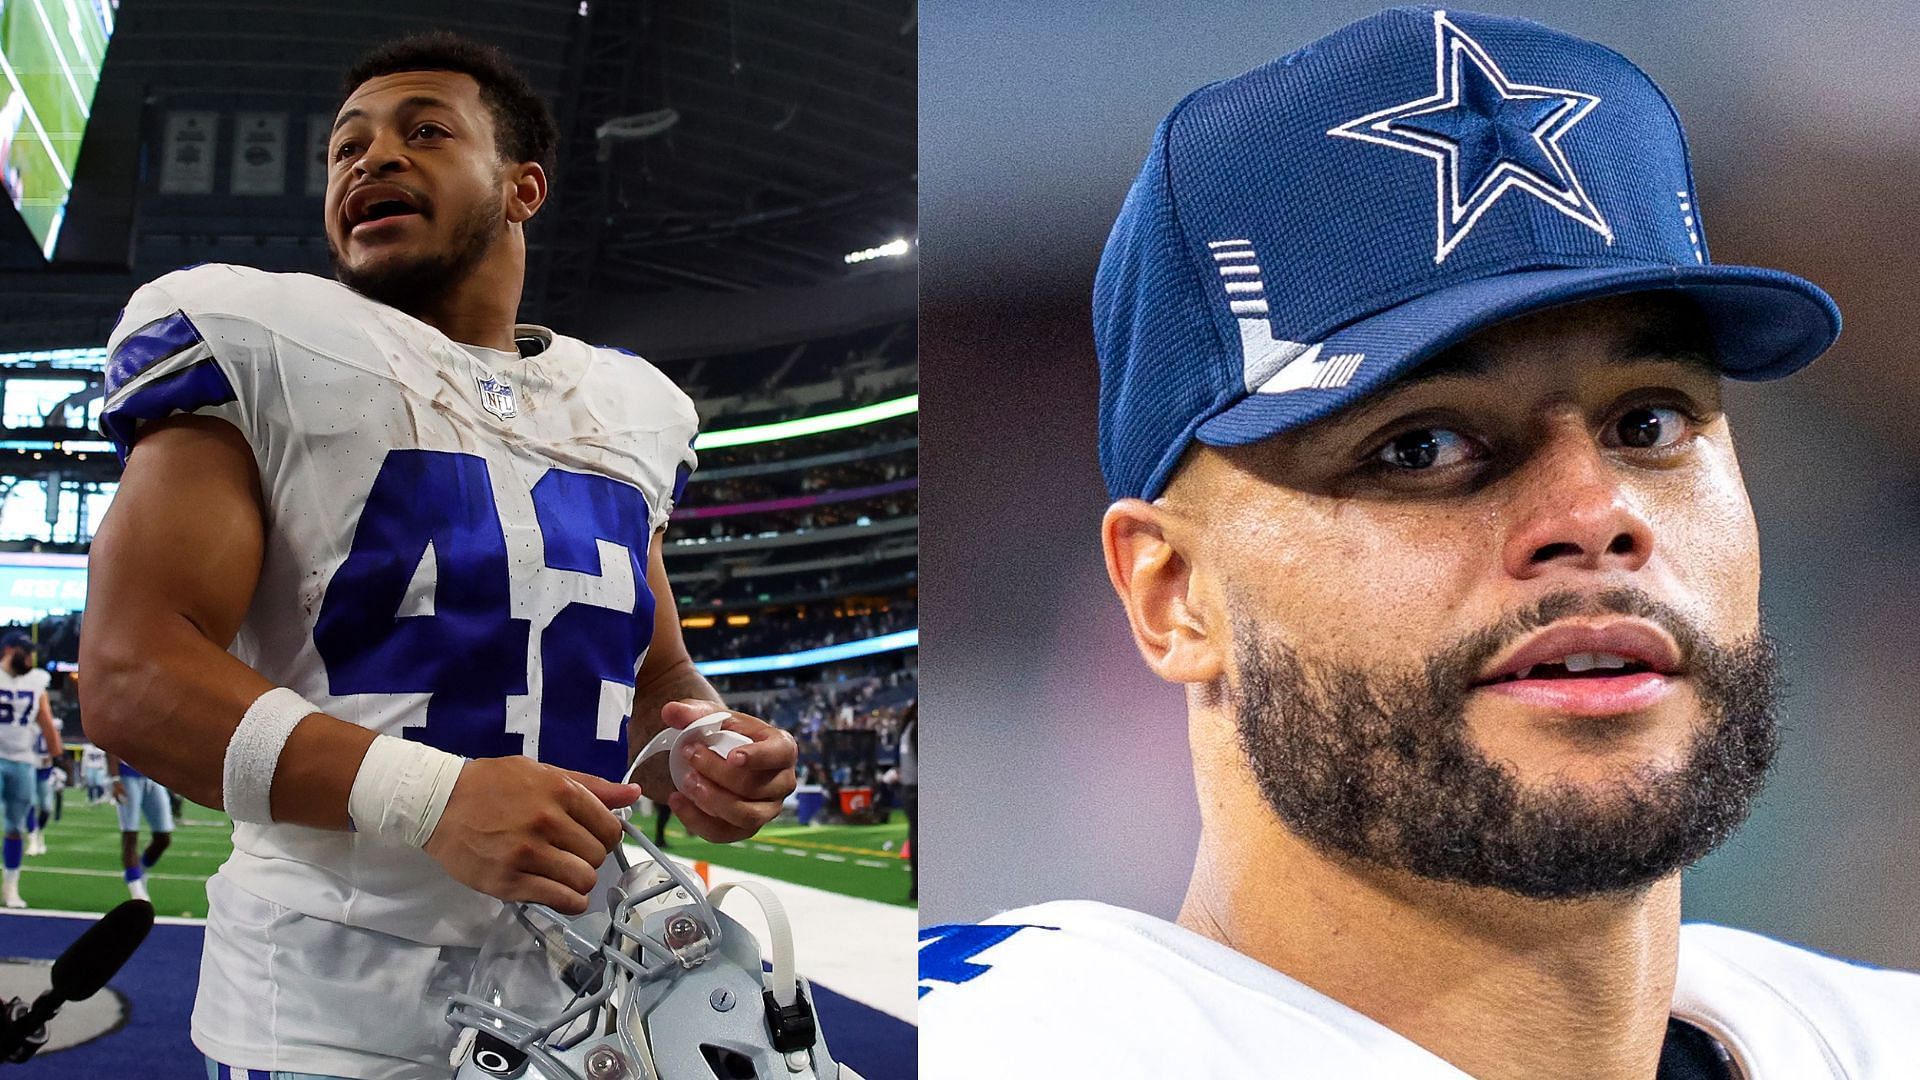 Deuce Vaughn (L) will play a notable role in the Cowboys offense led by Dak Prescott (R)